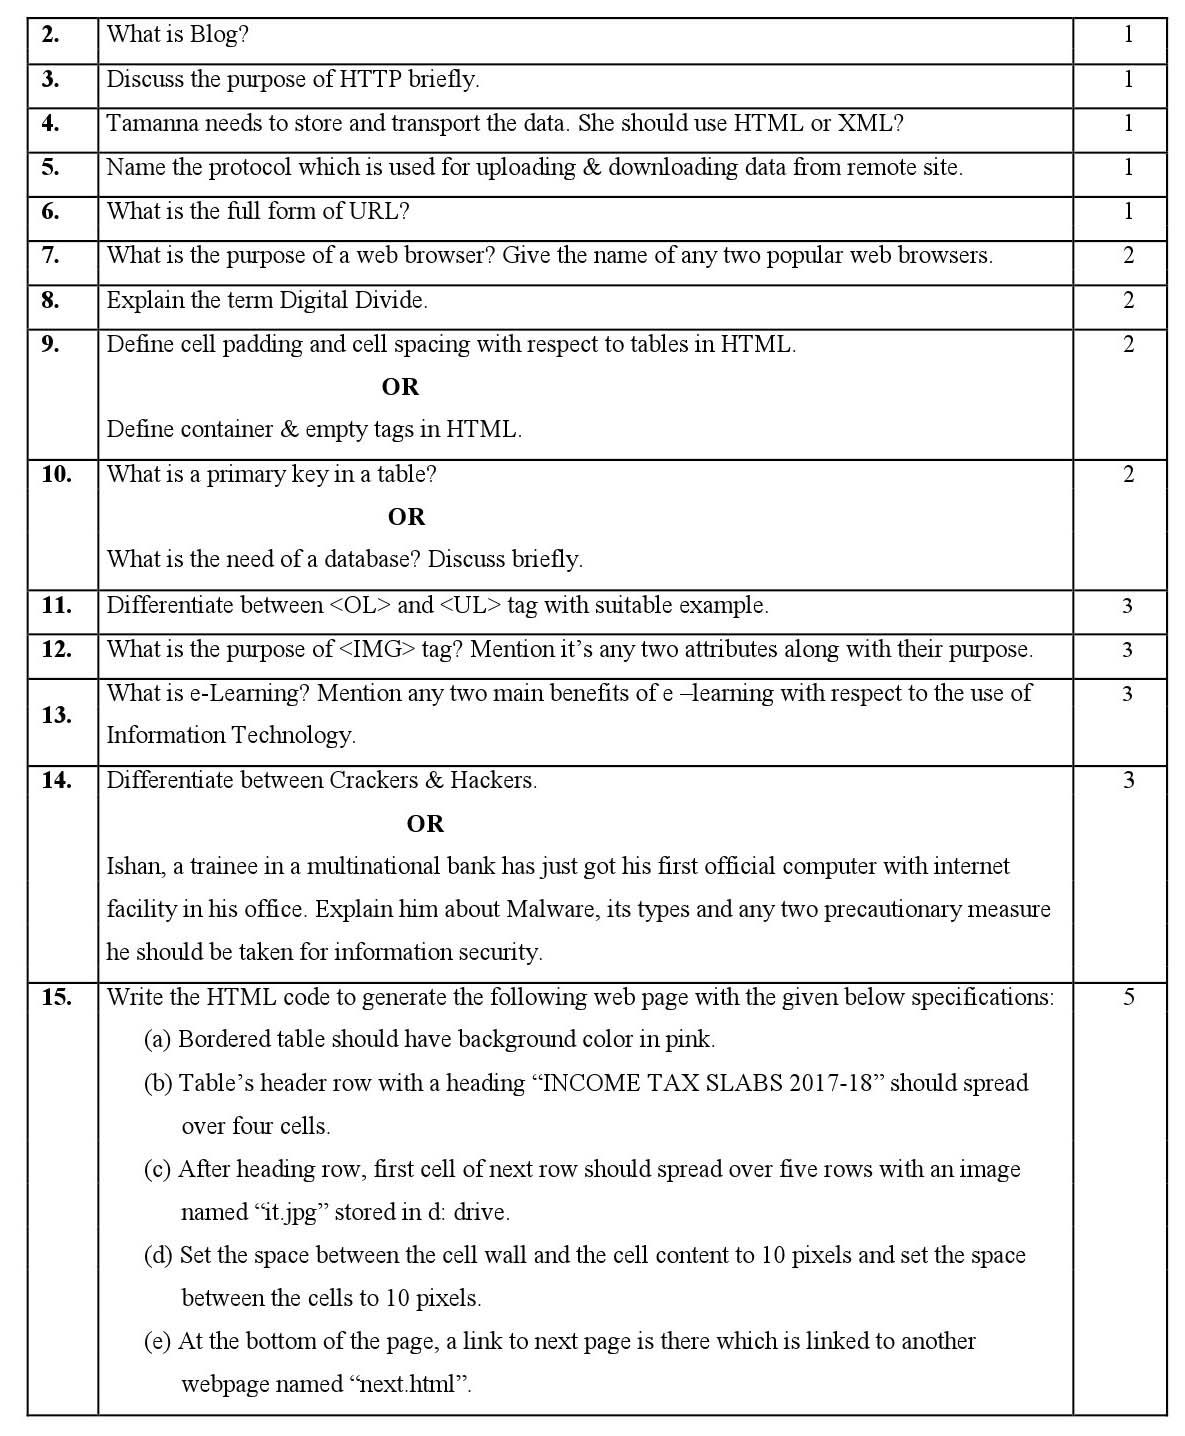 Foundation of Information Technology CBSE Class X Sample Question Paper 2018 19 - Image 2